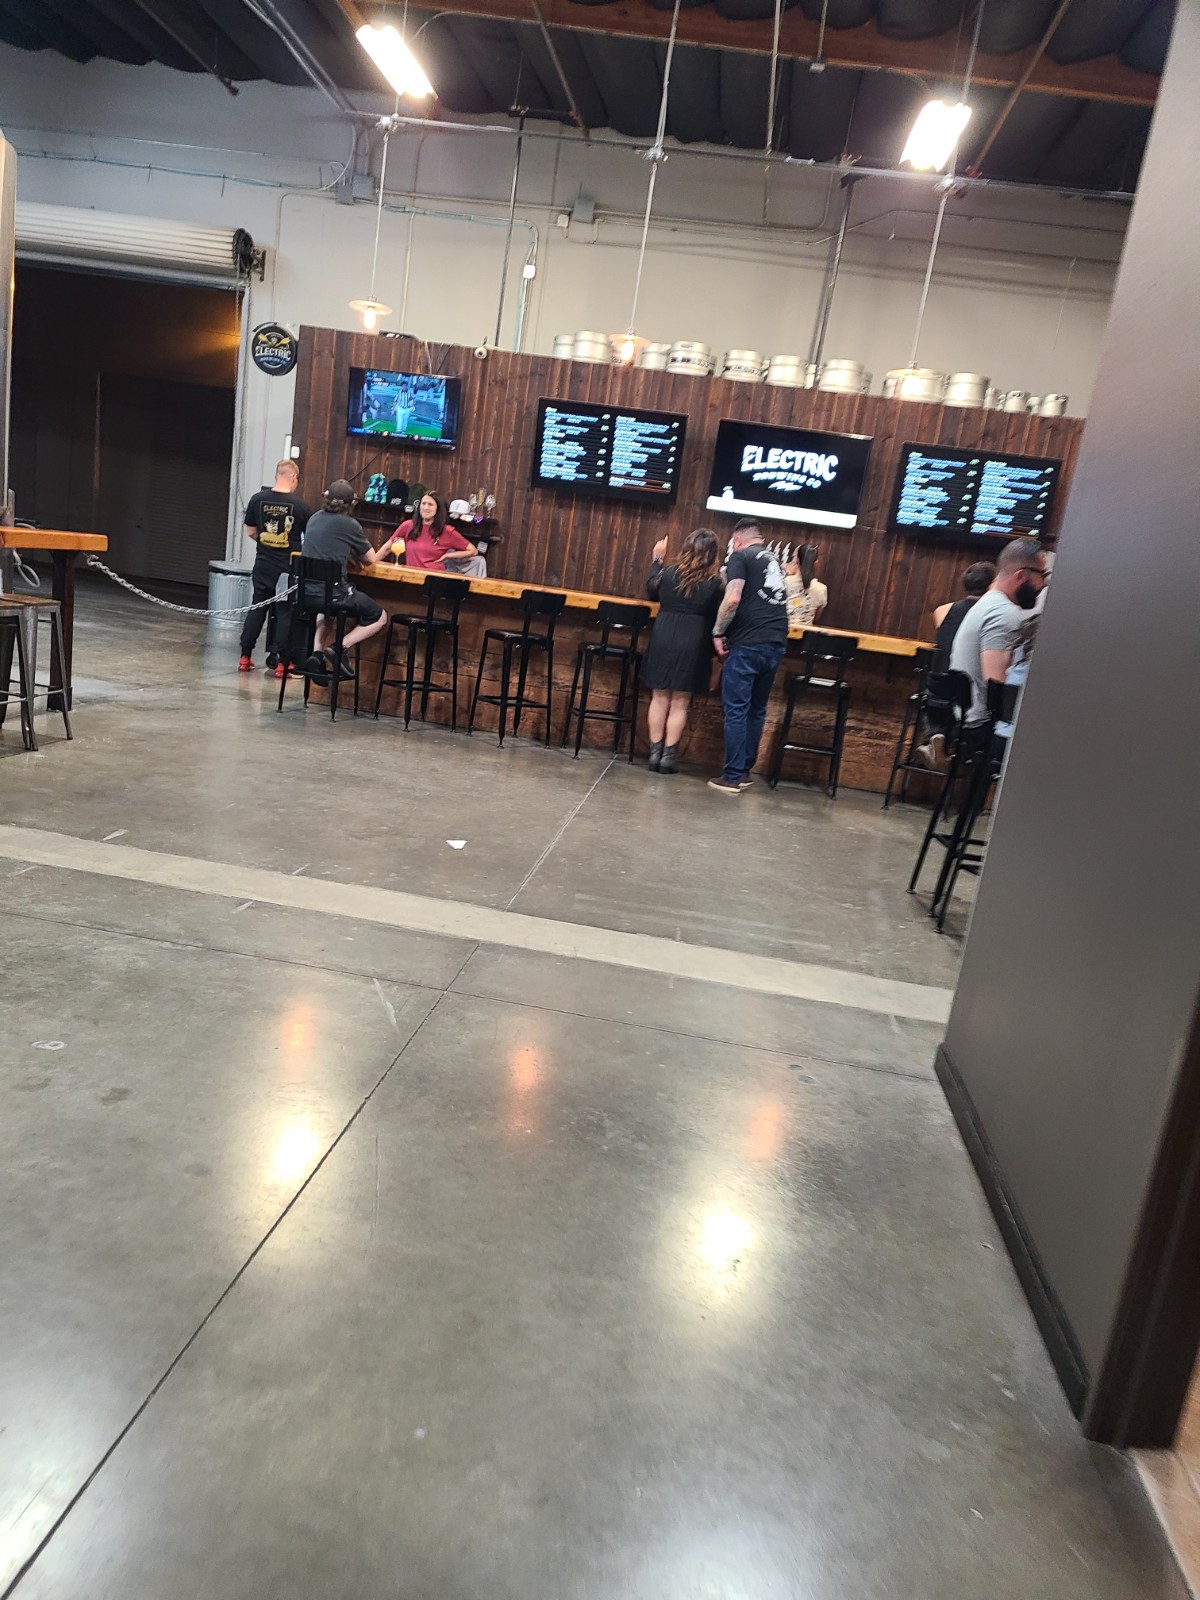 Electric Brewing Company - Tasting Room